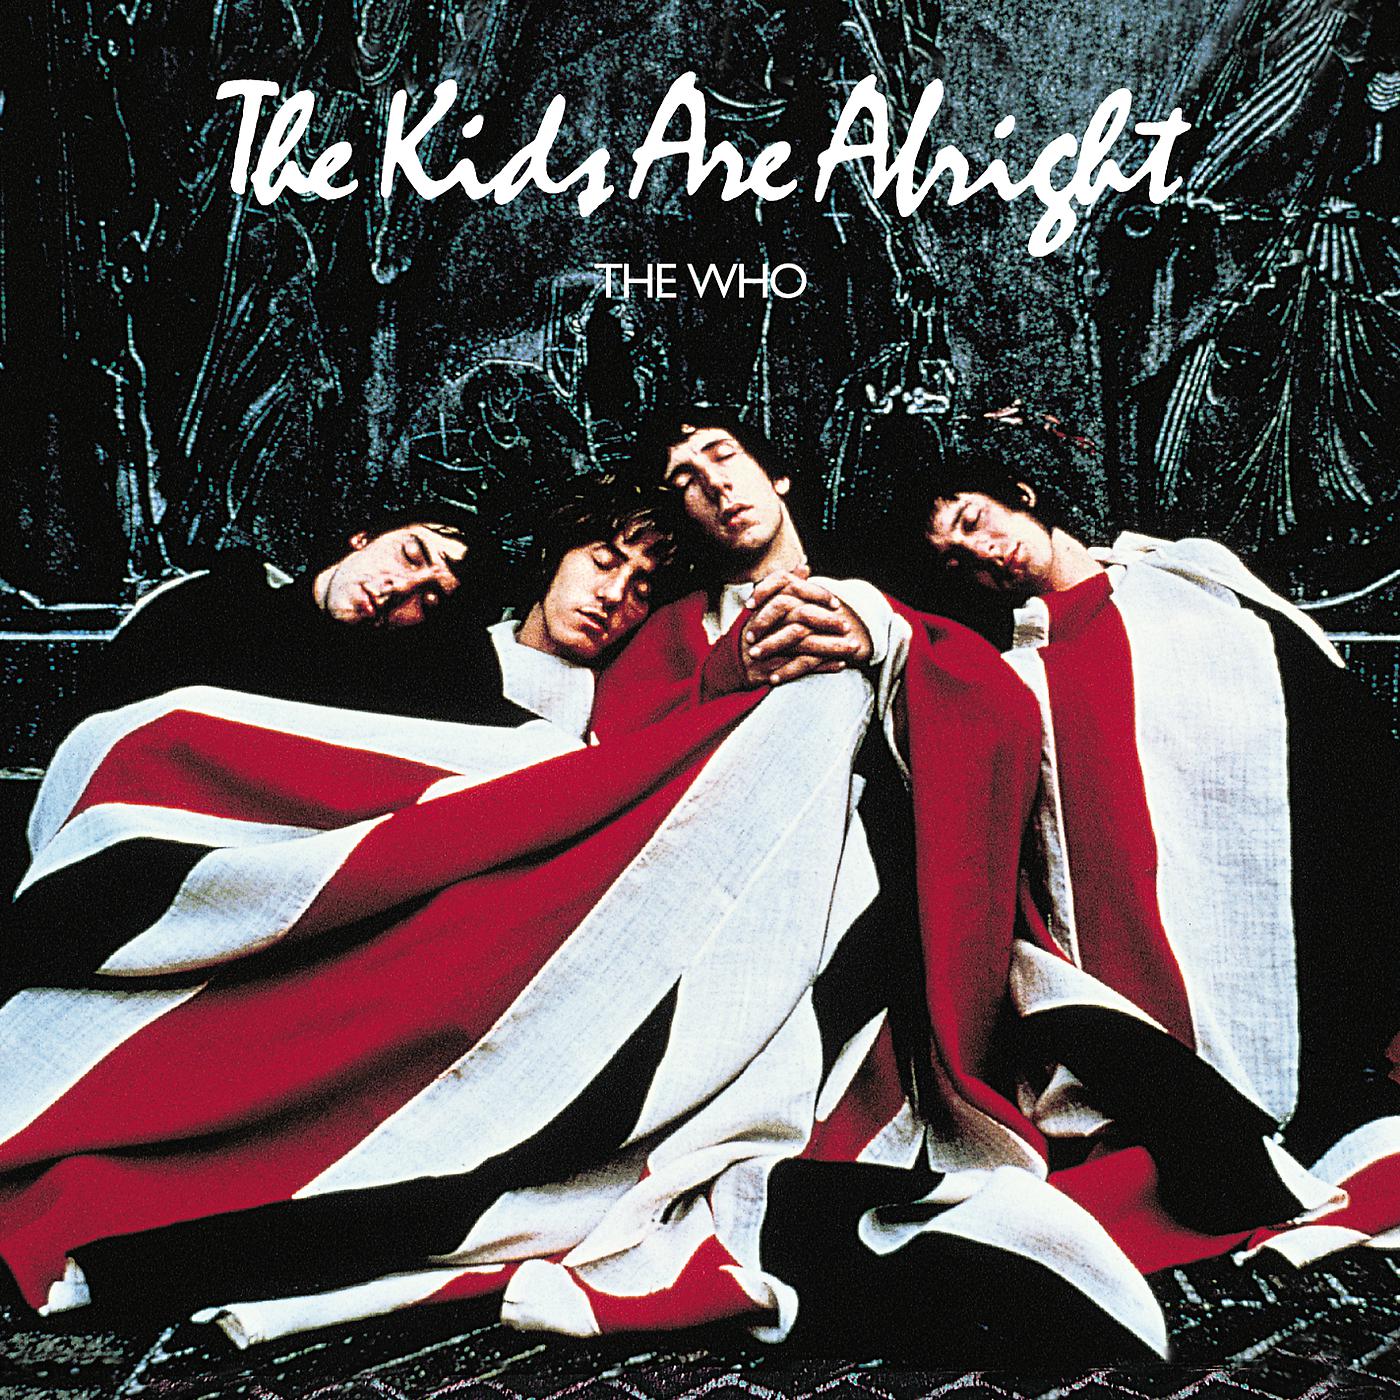 Albums the who. The who the Kids are Alright. The who обложки. Культовые обложки. Культовые обложки альбомов.